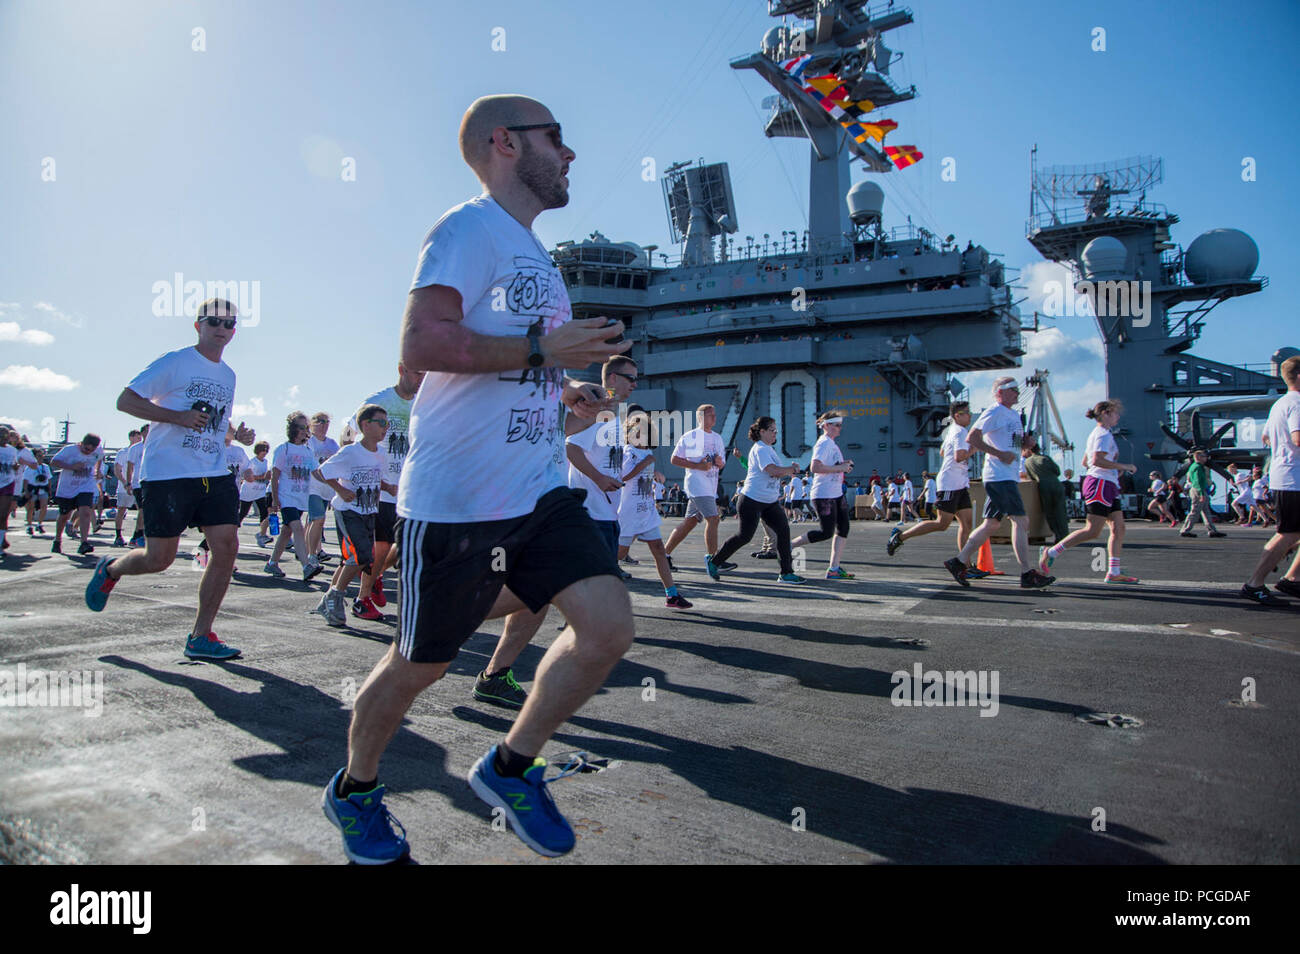 PACIFIC OCEAN (June 1, 2015) Sailors and tiger cruise participants run in the “Color Me Bad” 5 kilometer run aboard the aircraft carrier USS Carl Vinson (CVN 70). Carl Vinson and its embarked air wing, Carrier Air Wing (CVW) 17, are in the U.S. 3rd Fleet area of operations returning to homeport after a Middle East and western Pacific deployment. Stock Photo